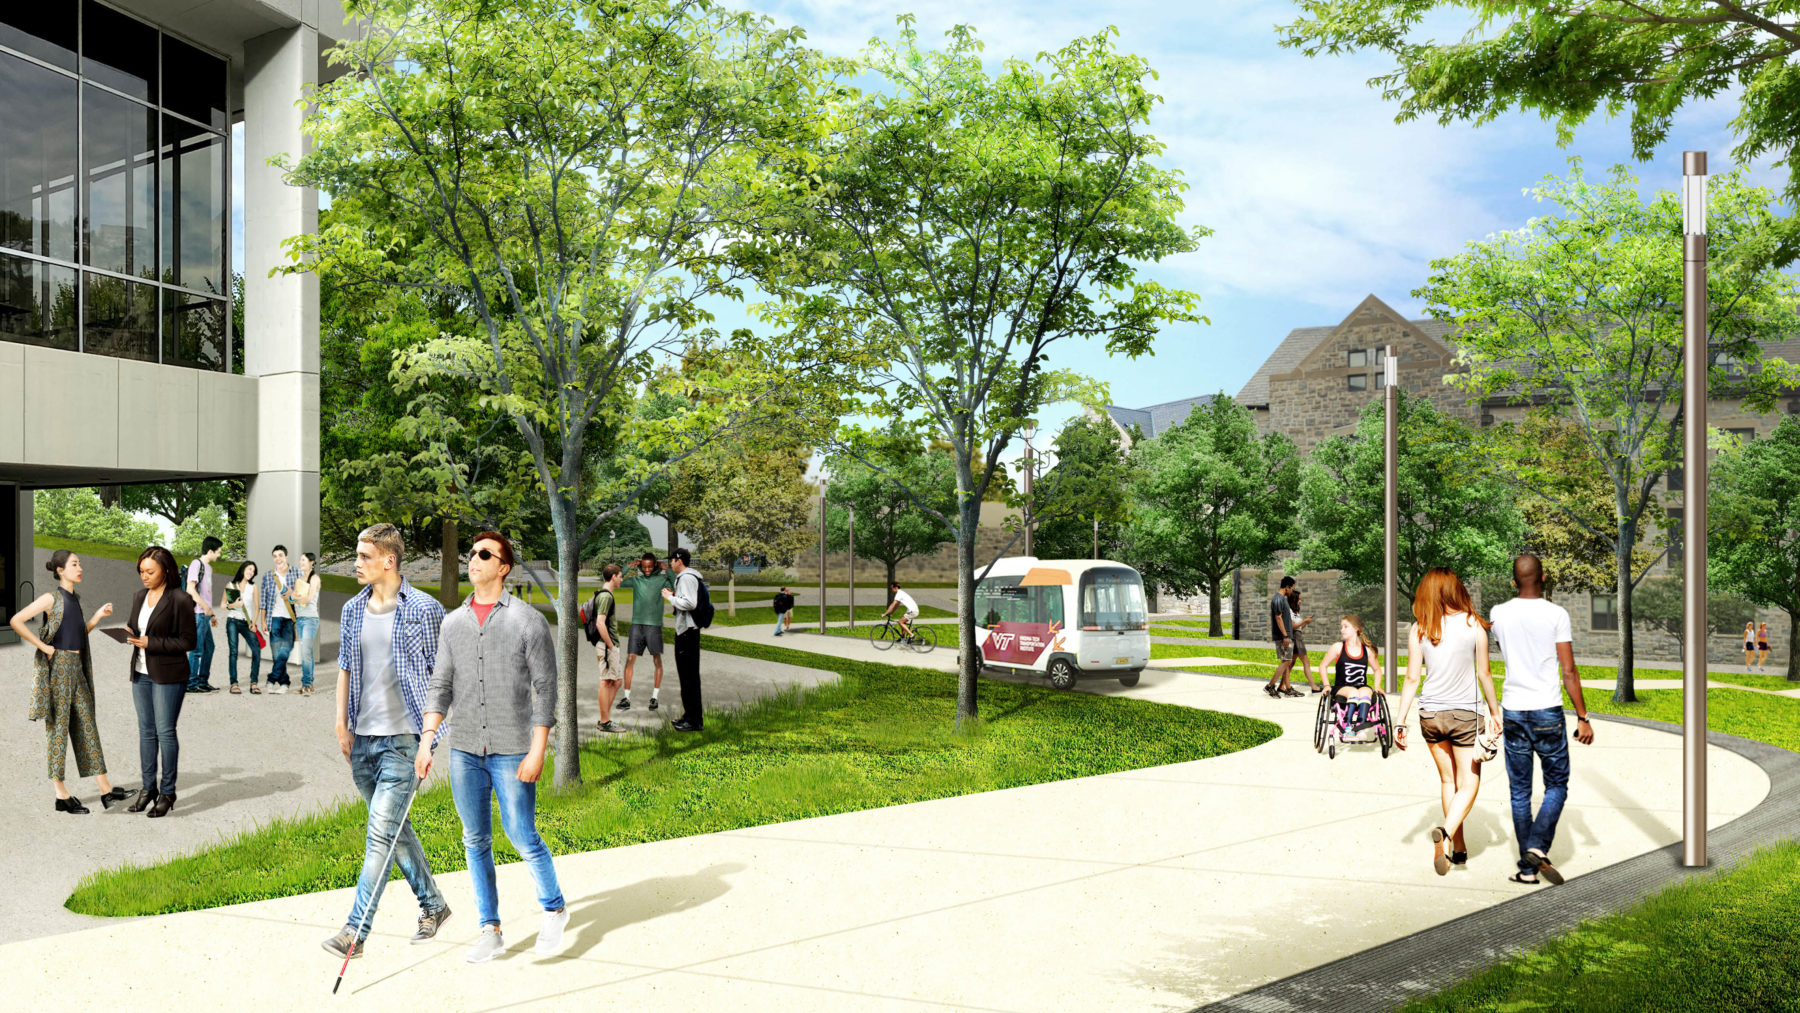 Rendering of the same space with a new, accessible path. Blind users and users in wheelchairs travel along the path together